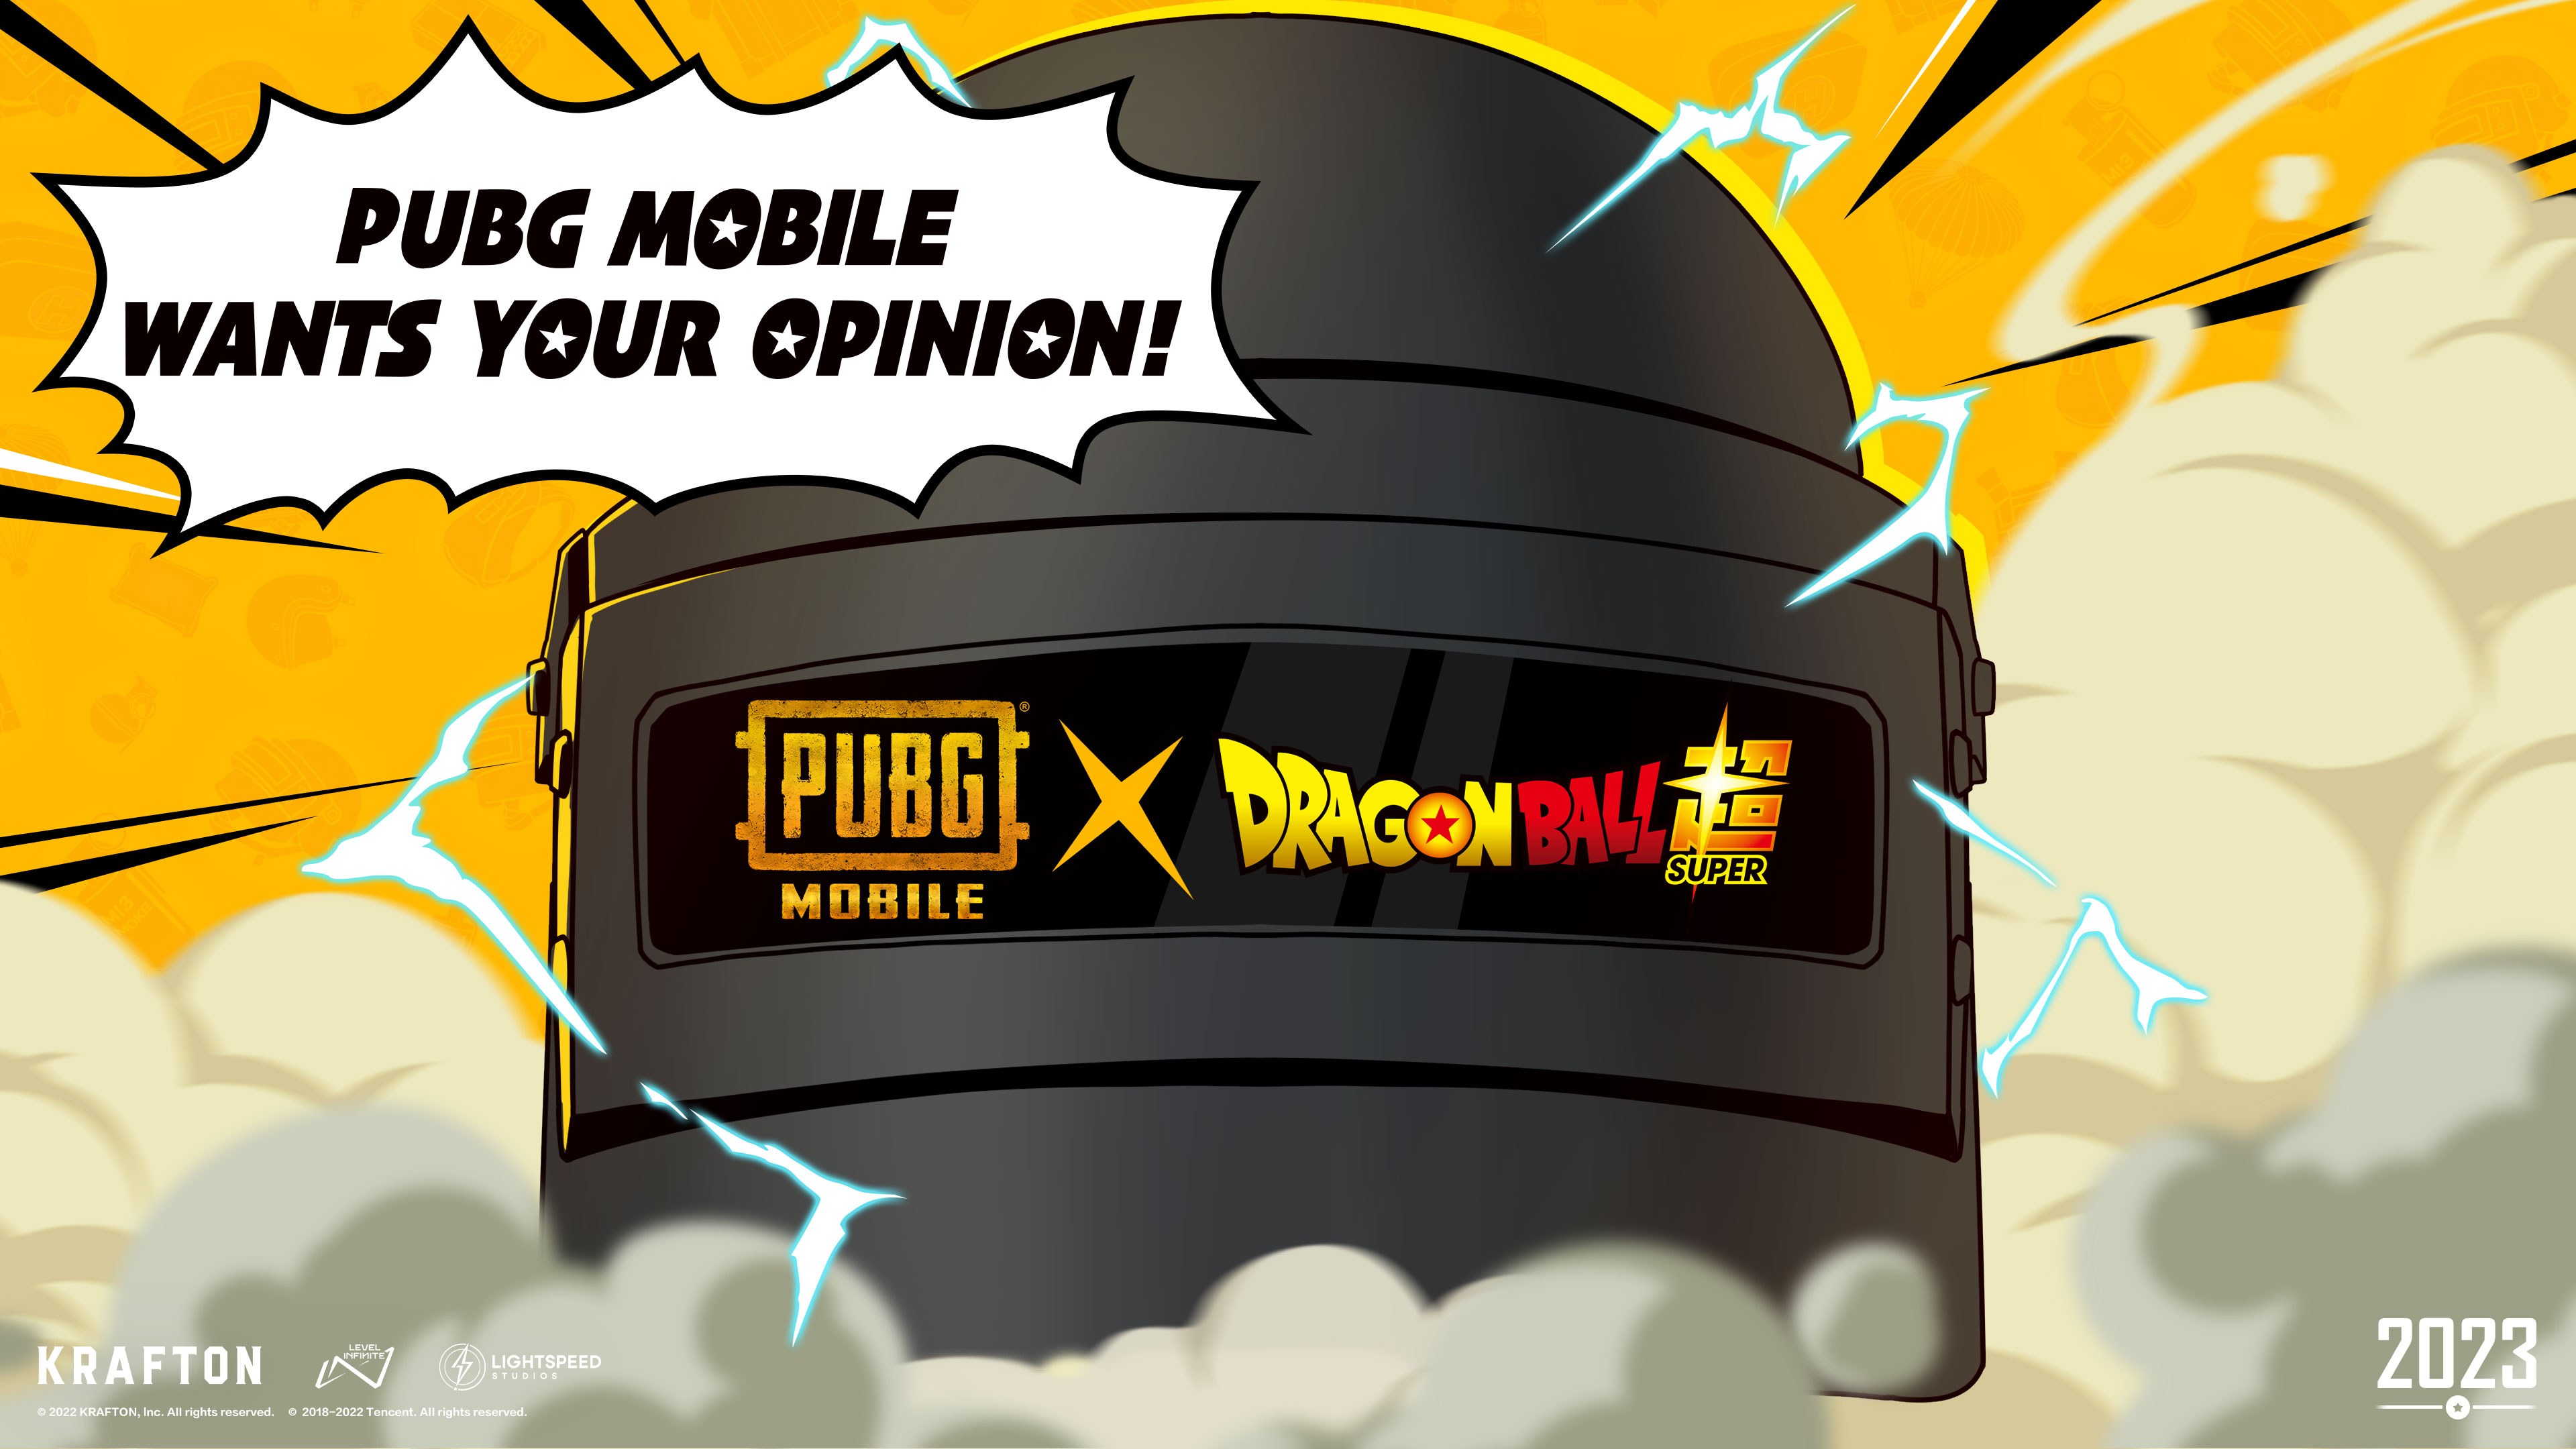 PUBG Mobile x Dragon Ball 2023: Level Infinite is giving a chance to suggest content for upcoming collaboration